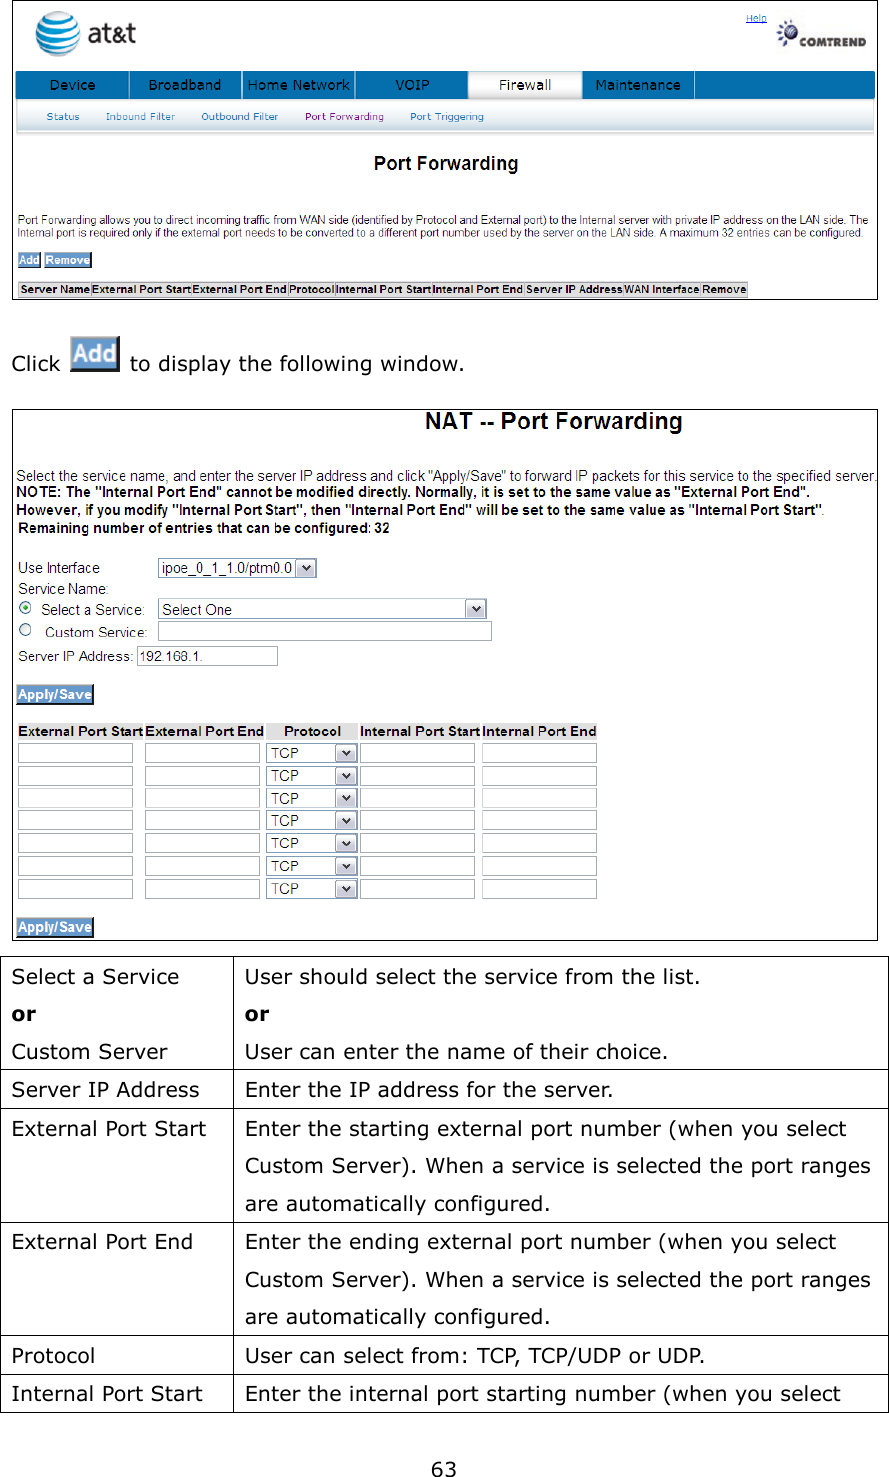 63  Click    to display the following window.    Select a Service or Custom Server User should select the service from the list. or User can enter the name of their choice. Server IP Address  Enter the IP address for the server. External Port Start  Enter the starting external port number (when you select Custom Server). When a service is selected the port ranges are automatically configured. External Port End  Enter the ending external port number (when you select Custom Server). When a service is selected the port ranges are automatically configured. Protocol  User can select from: TCP, TCP/UDP or UDP. Internal Port Start  Enter the internal port starting number (when you select 